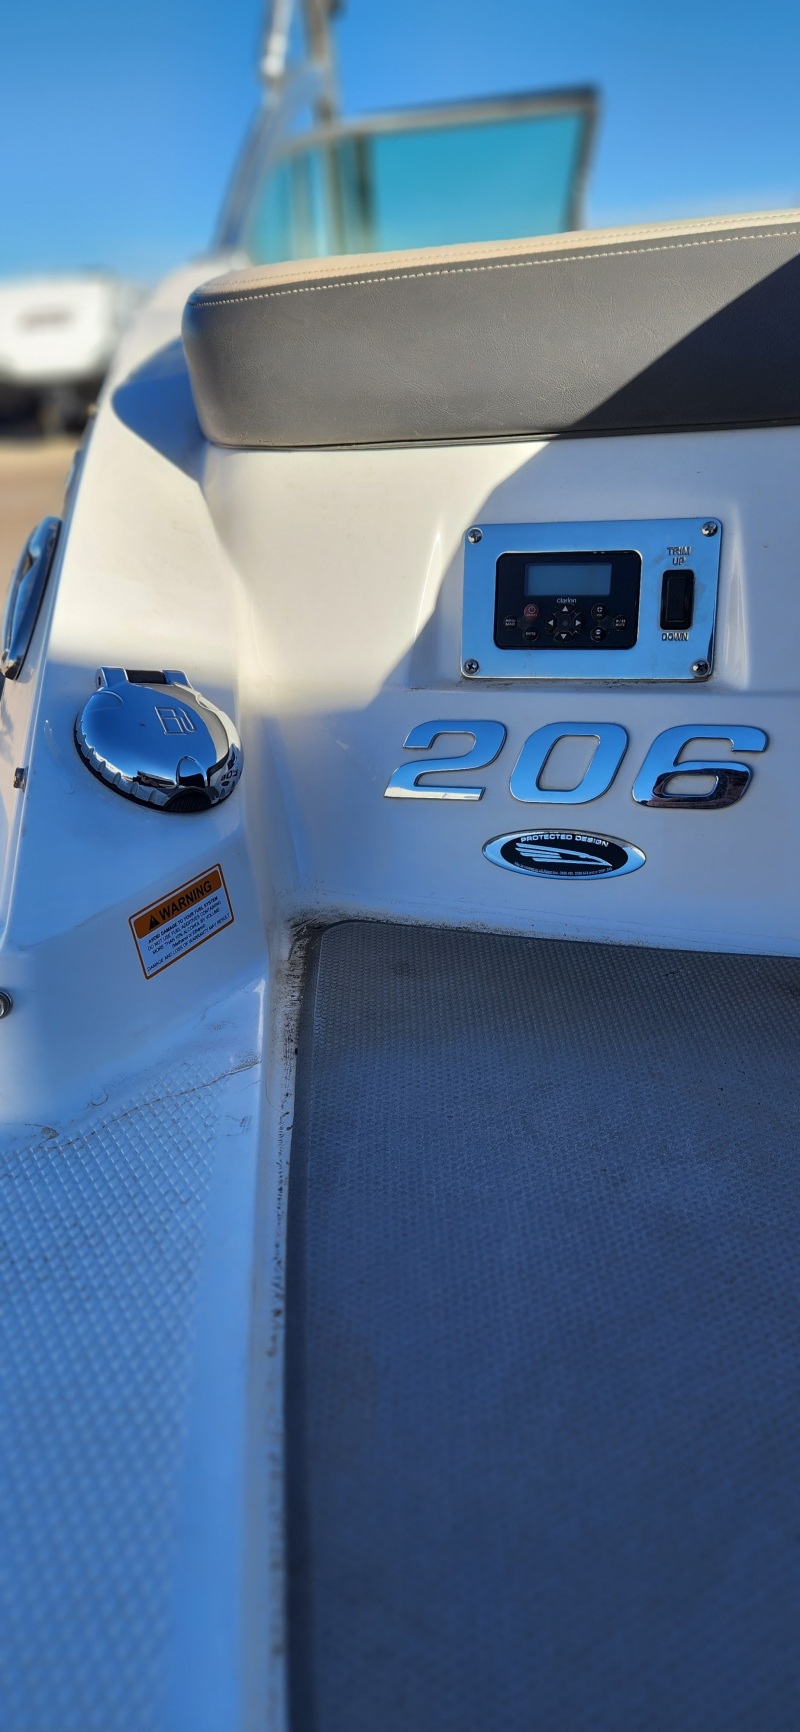 2013 Chaparral SSI 206 Power boat for sale in Brighton, CO - image 5 